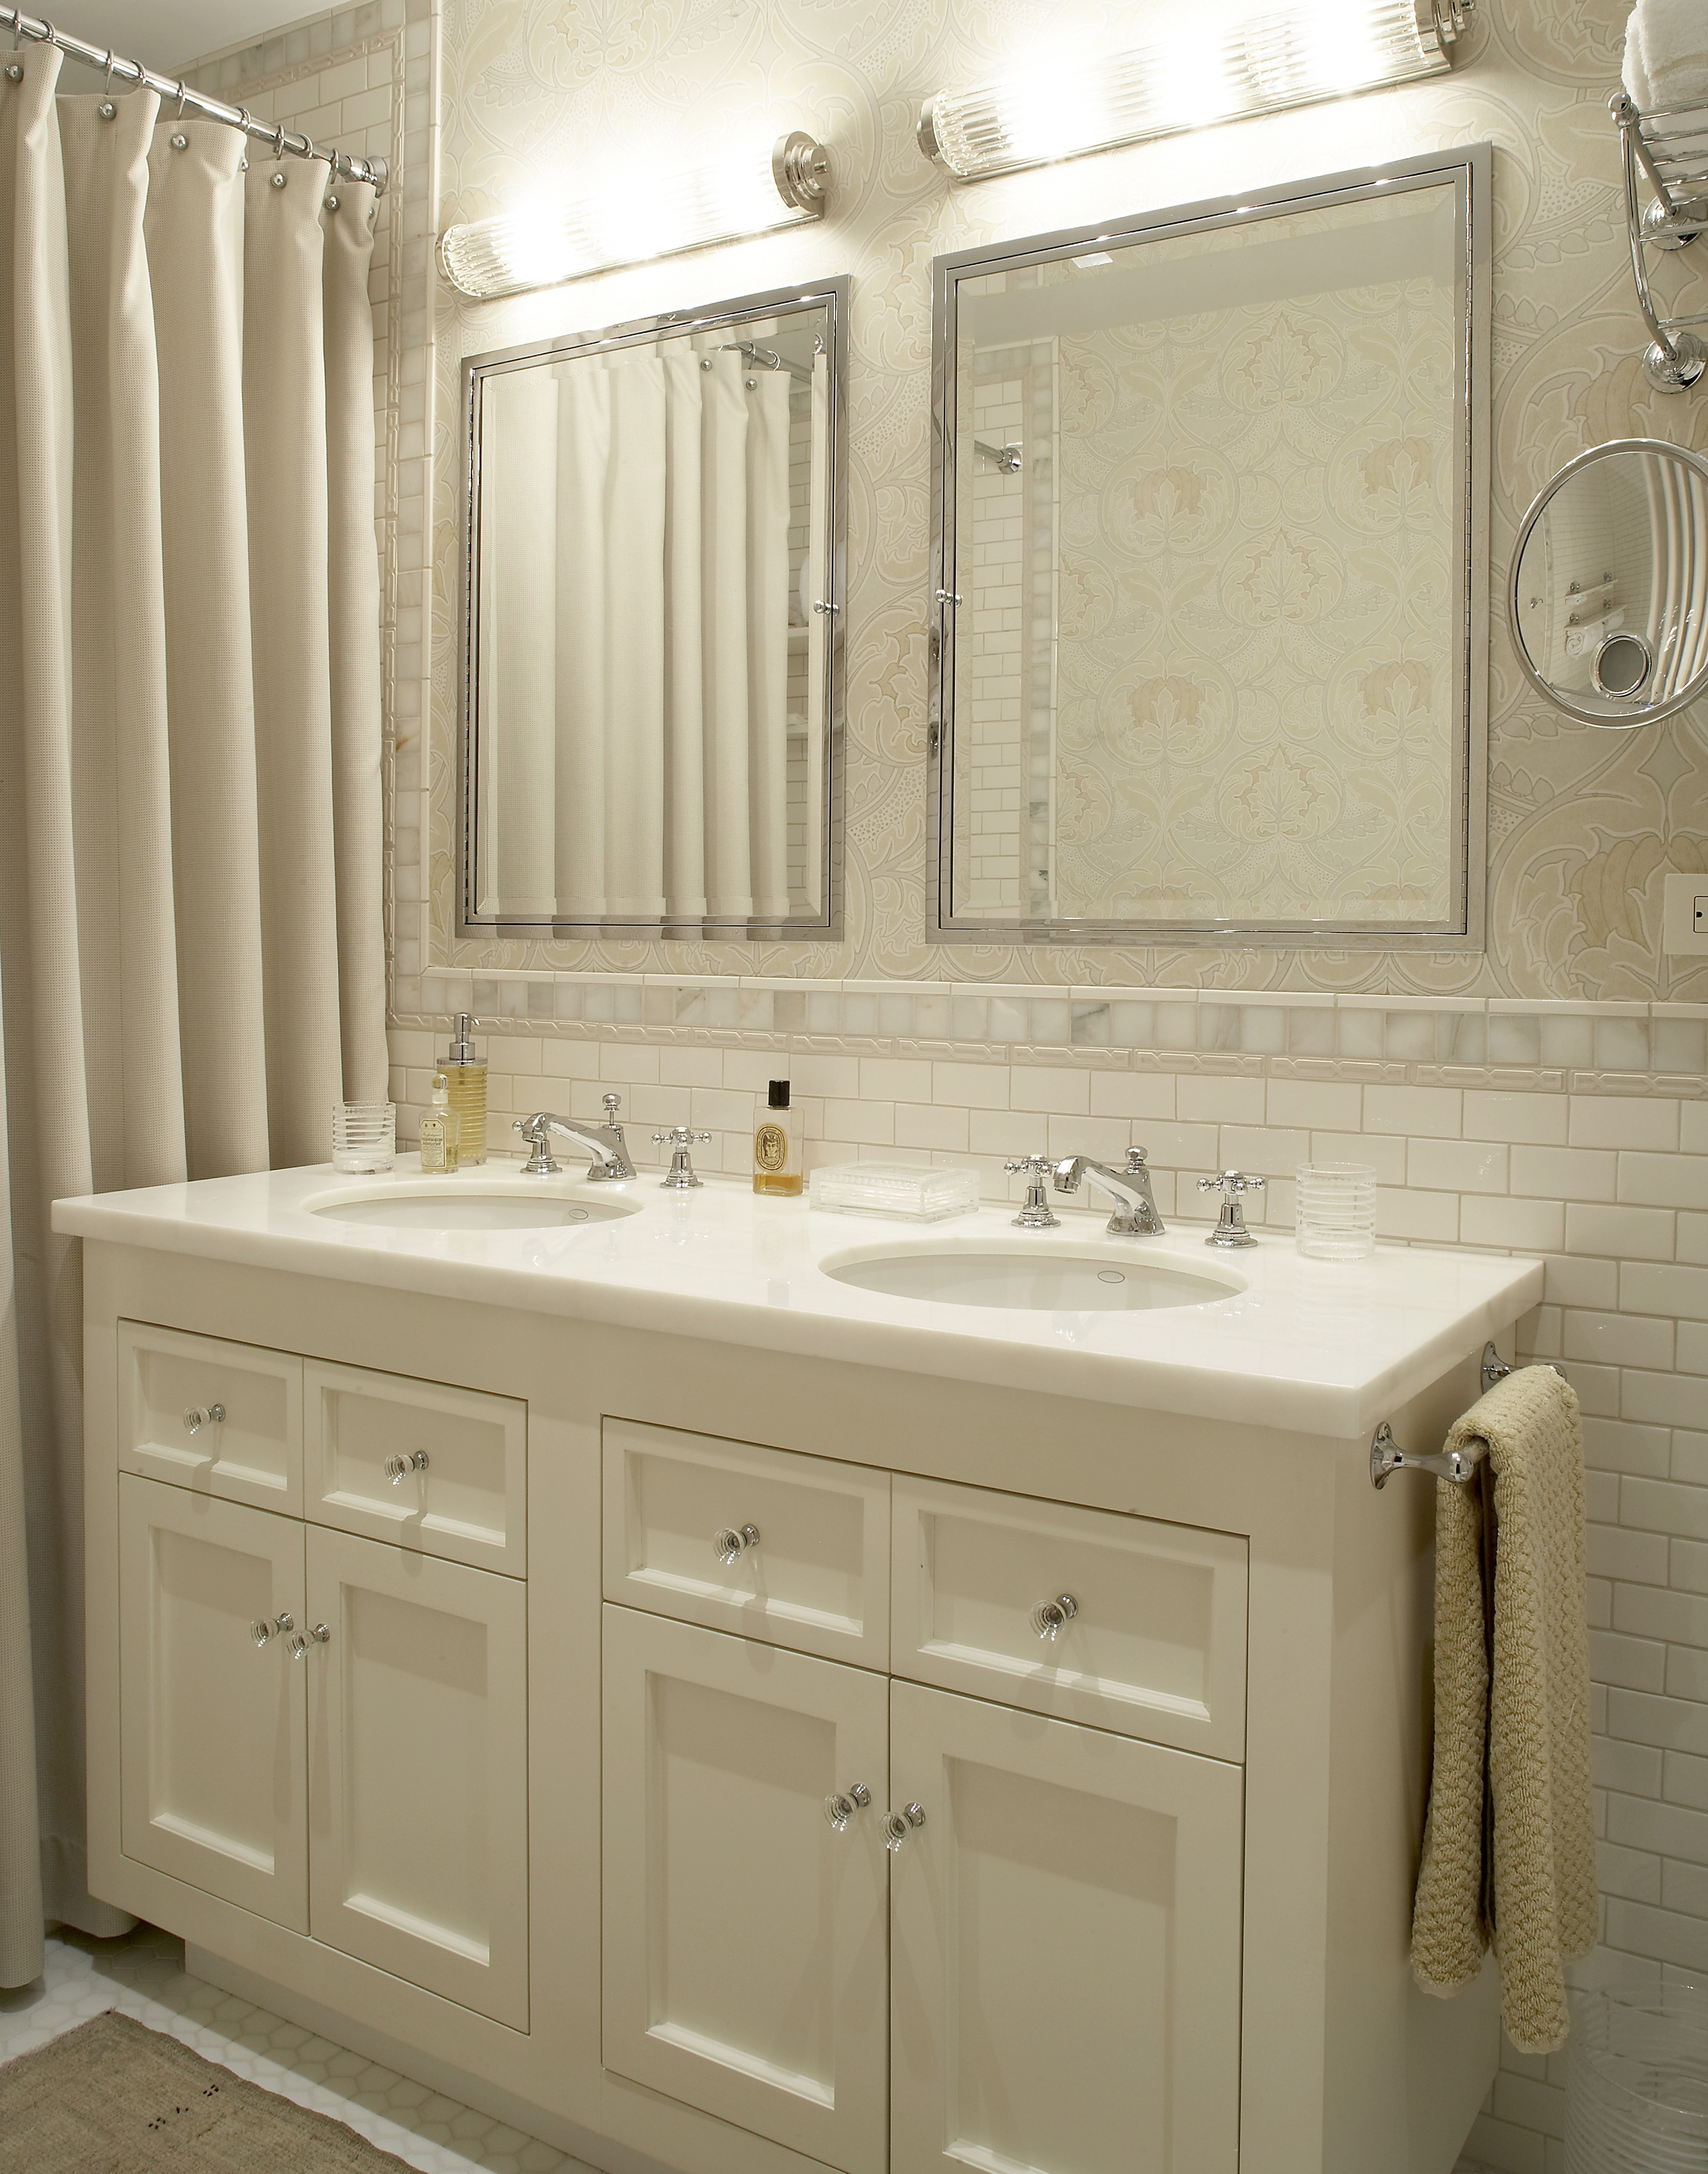  Transitional Apartment Bathroom. Central Park West  by Goralnick Architecture and Deisgn.